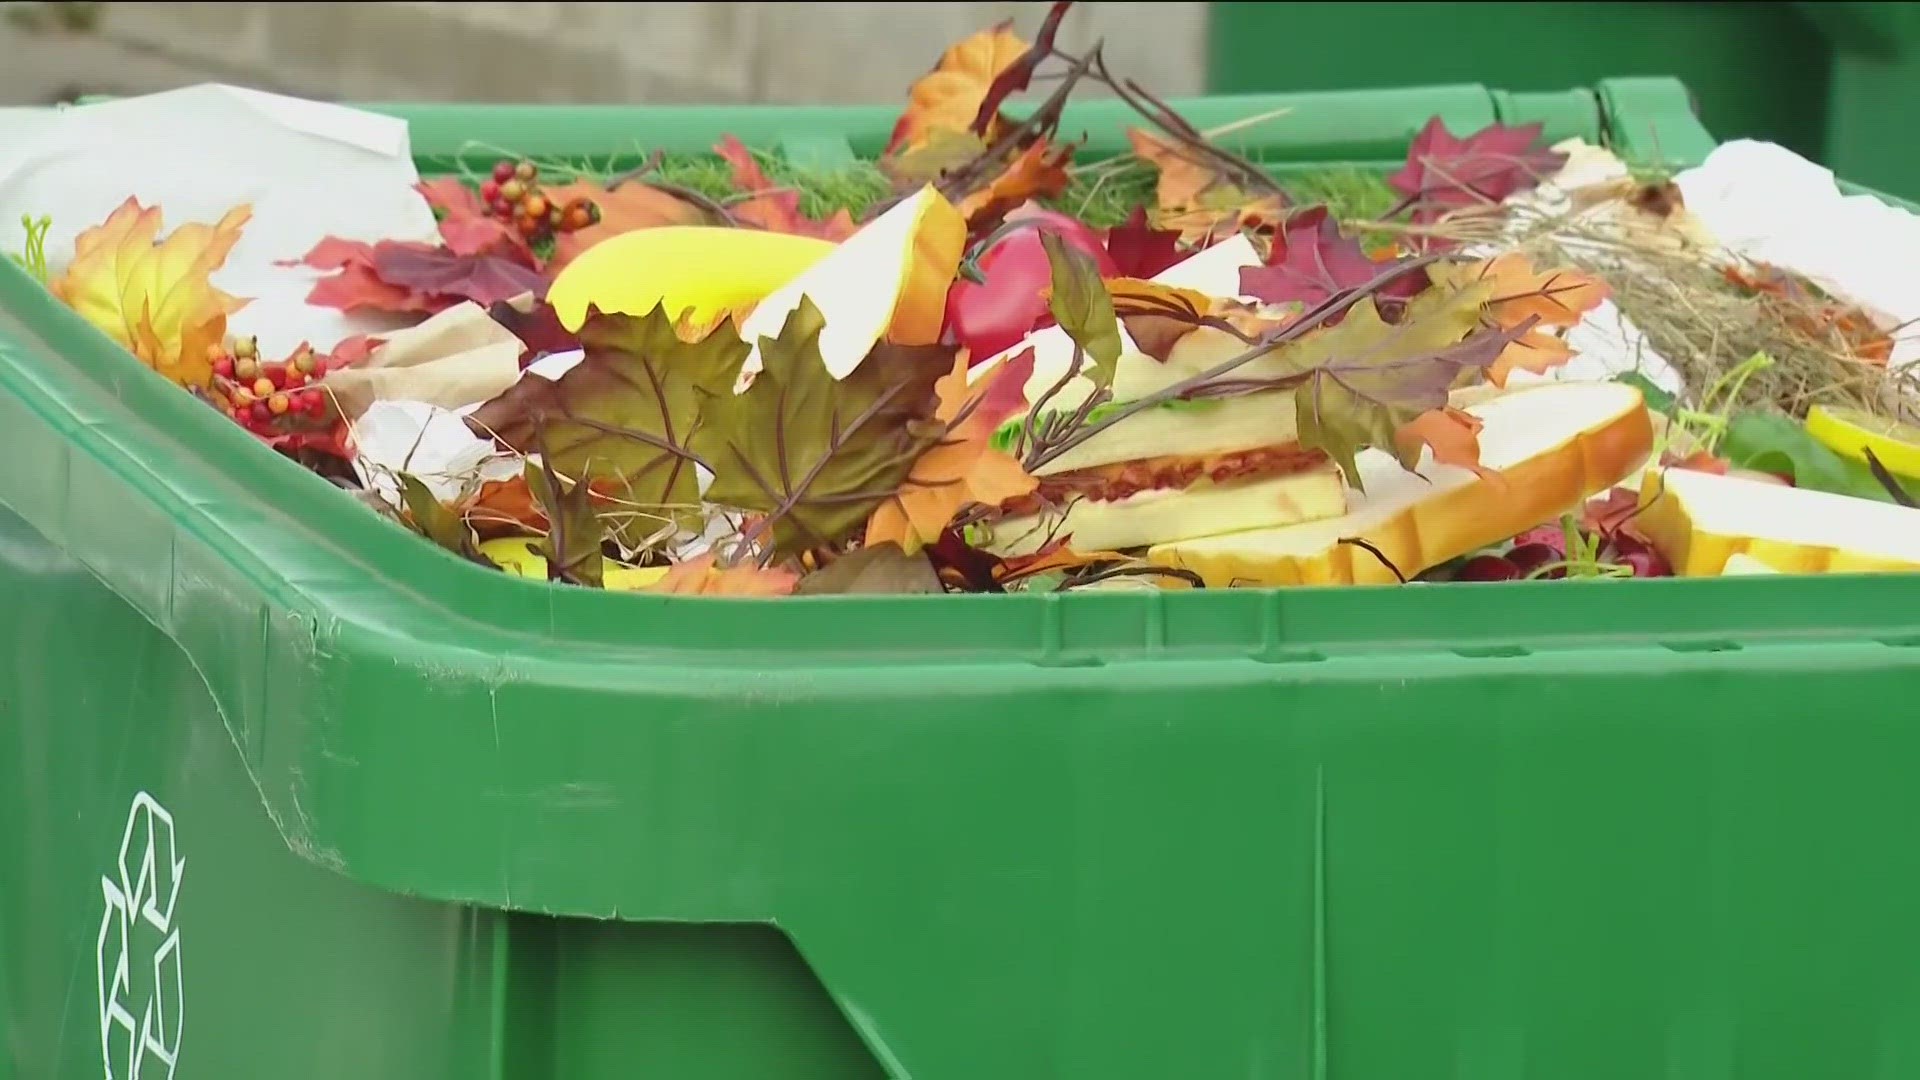 The city’s Organic Waste Recycling Program was implemented as a way to fight climate change by helping eliminate harmful greenhouse gases from food waste.